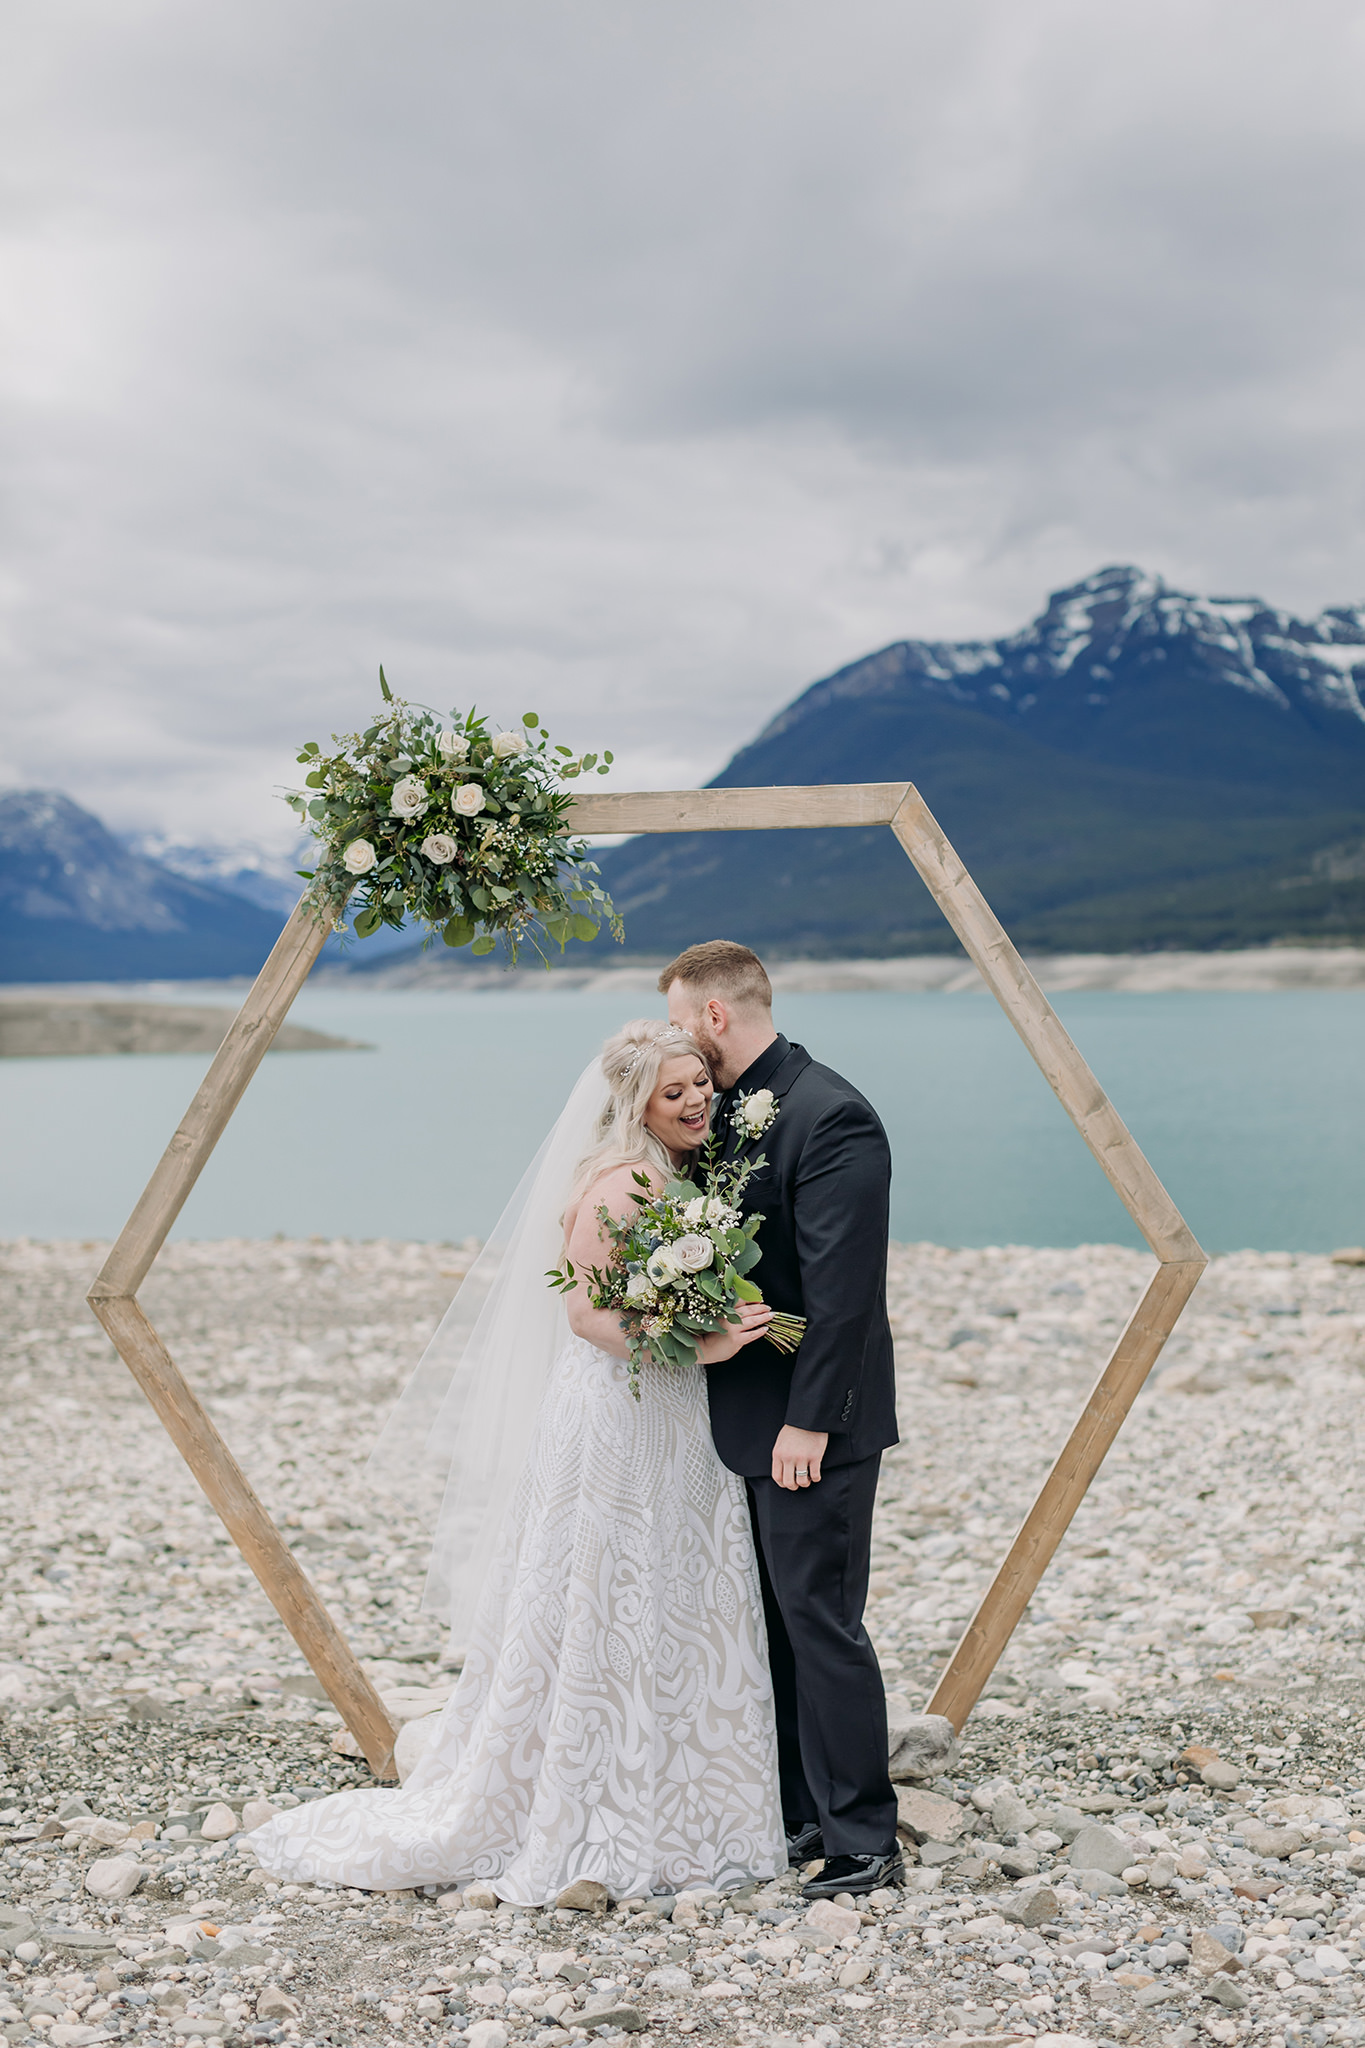 Abraham Lake Spring Mountain wedding with outdoor wedding ceremony with blue waters & mountains in the distance